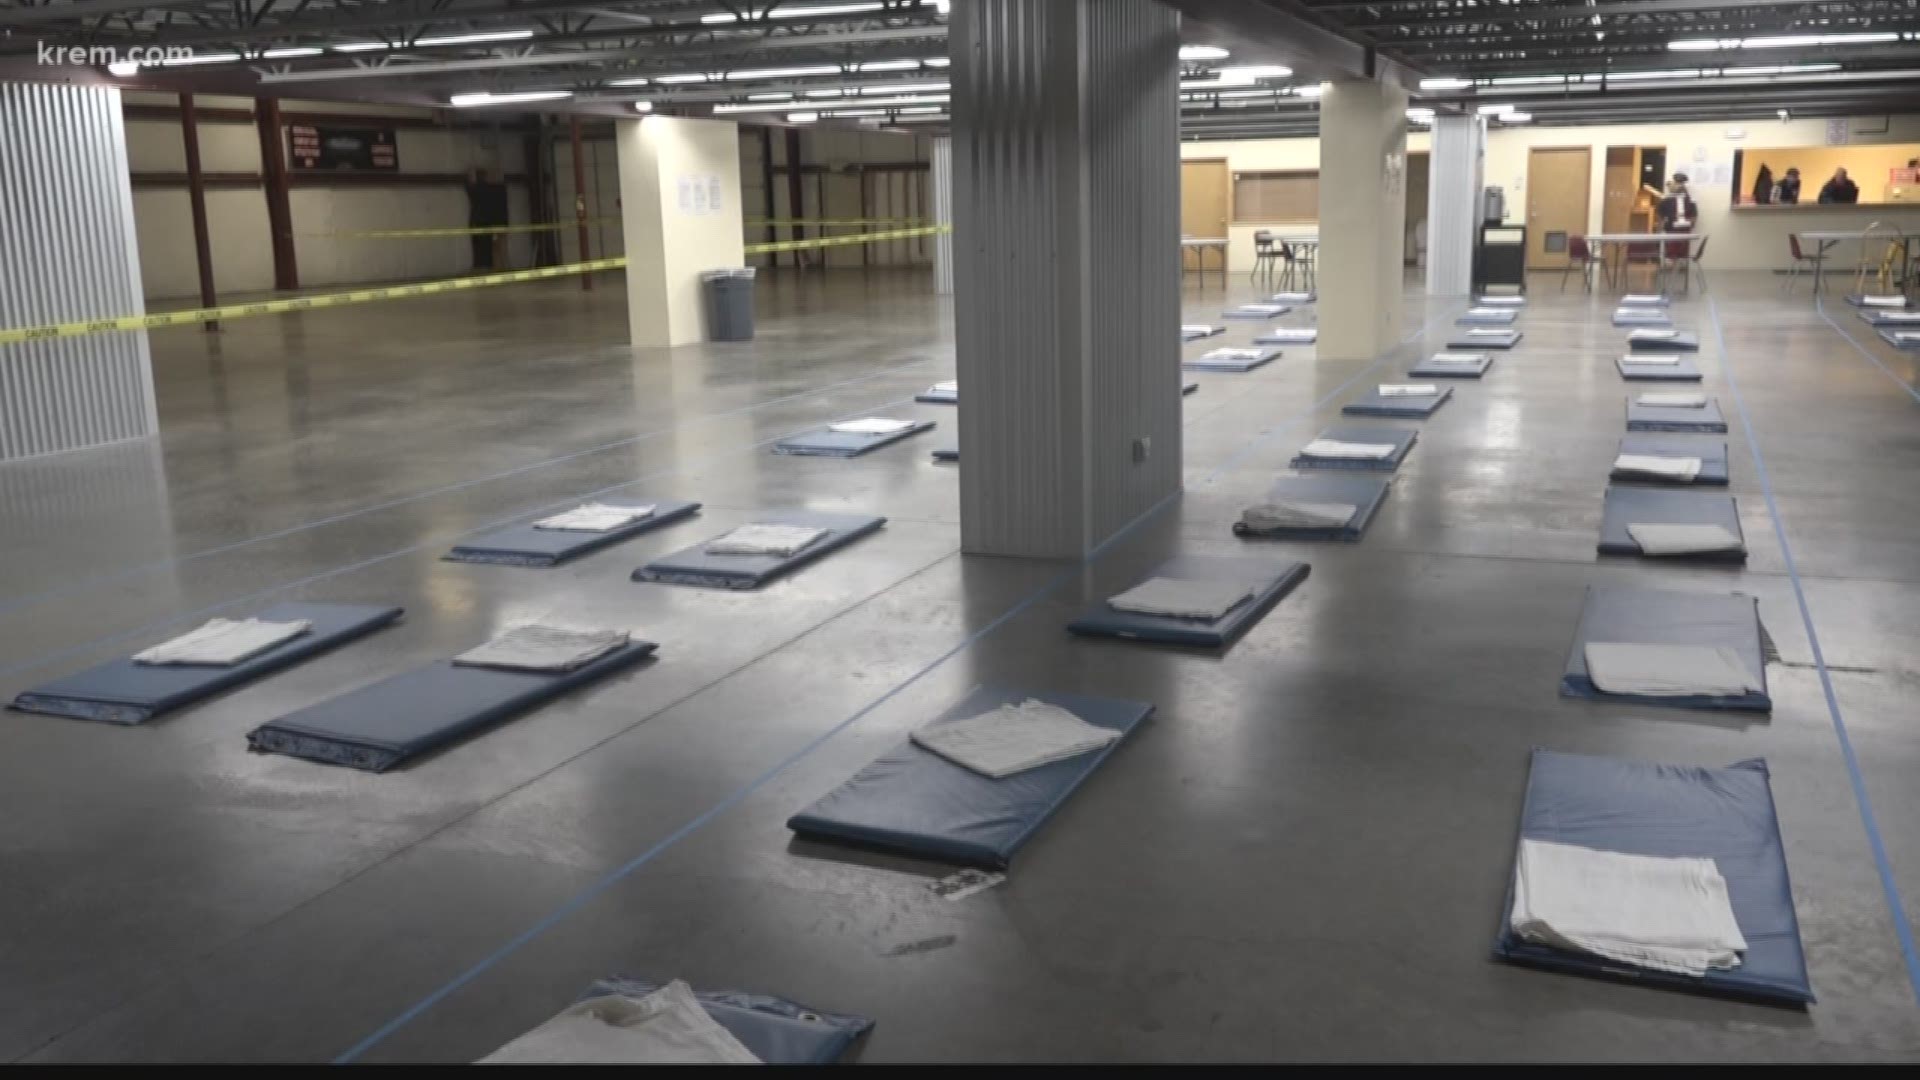 The warming center will eventually have capacity for 120 people but that worries some neighbors.